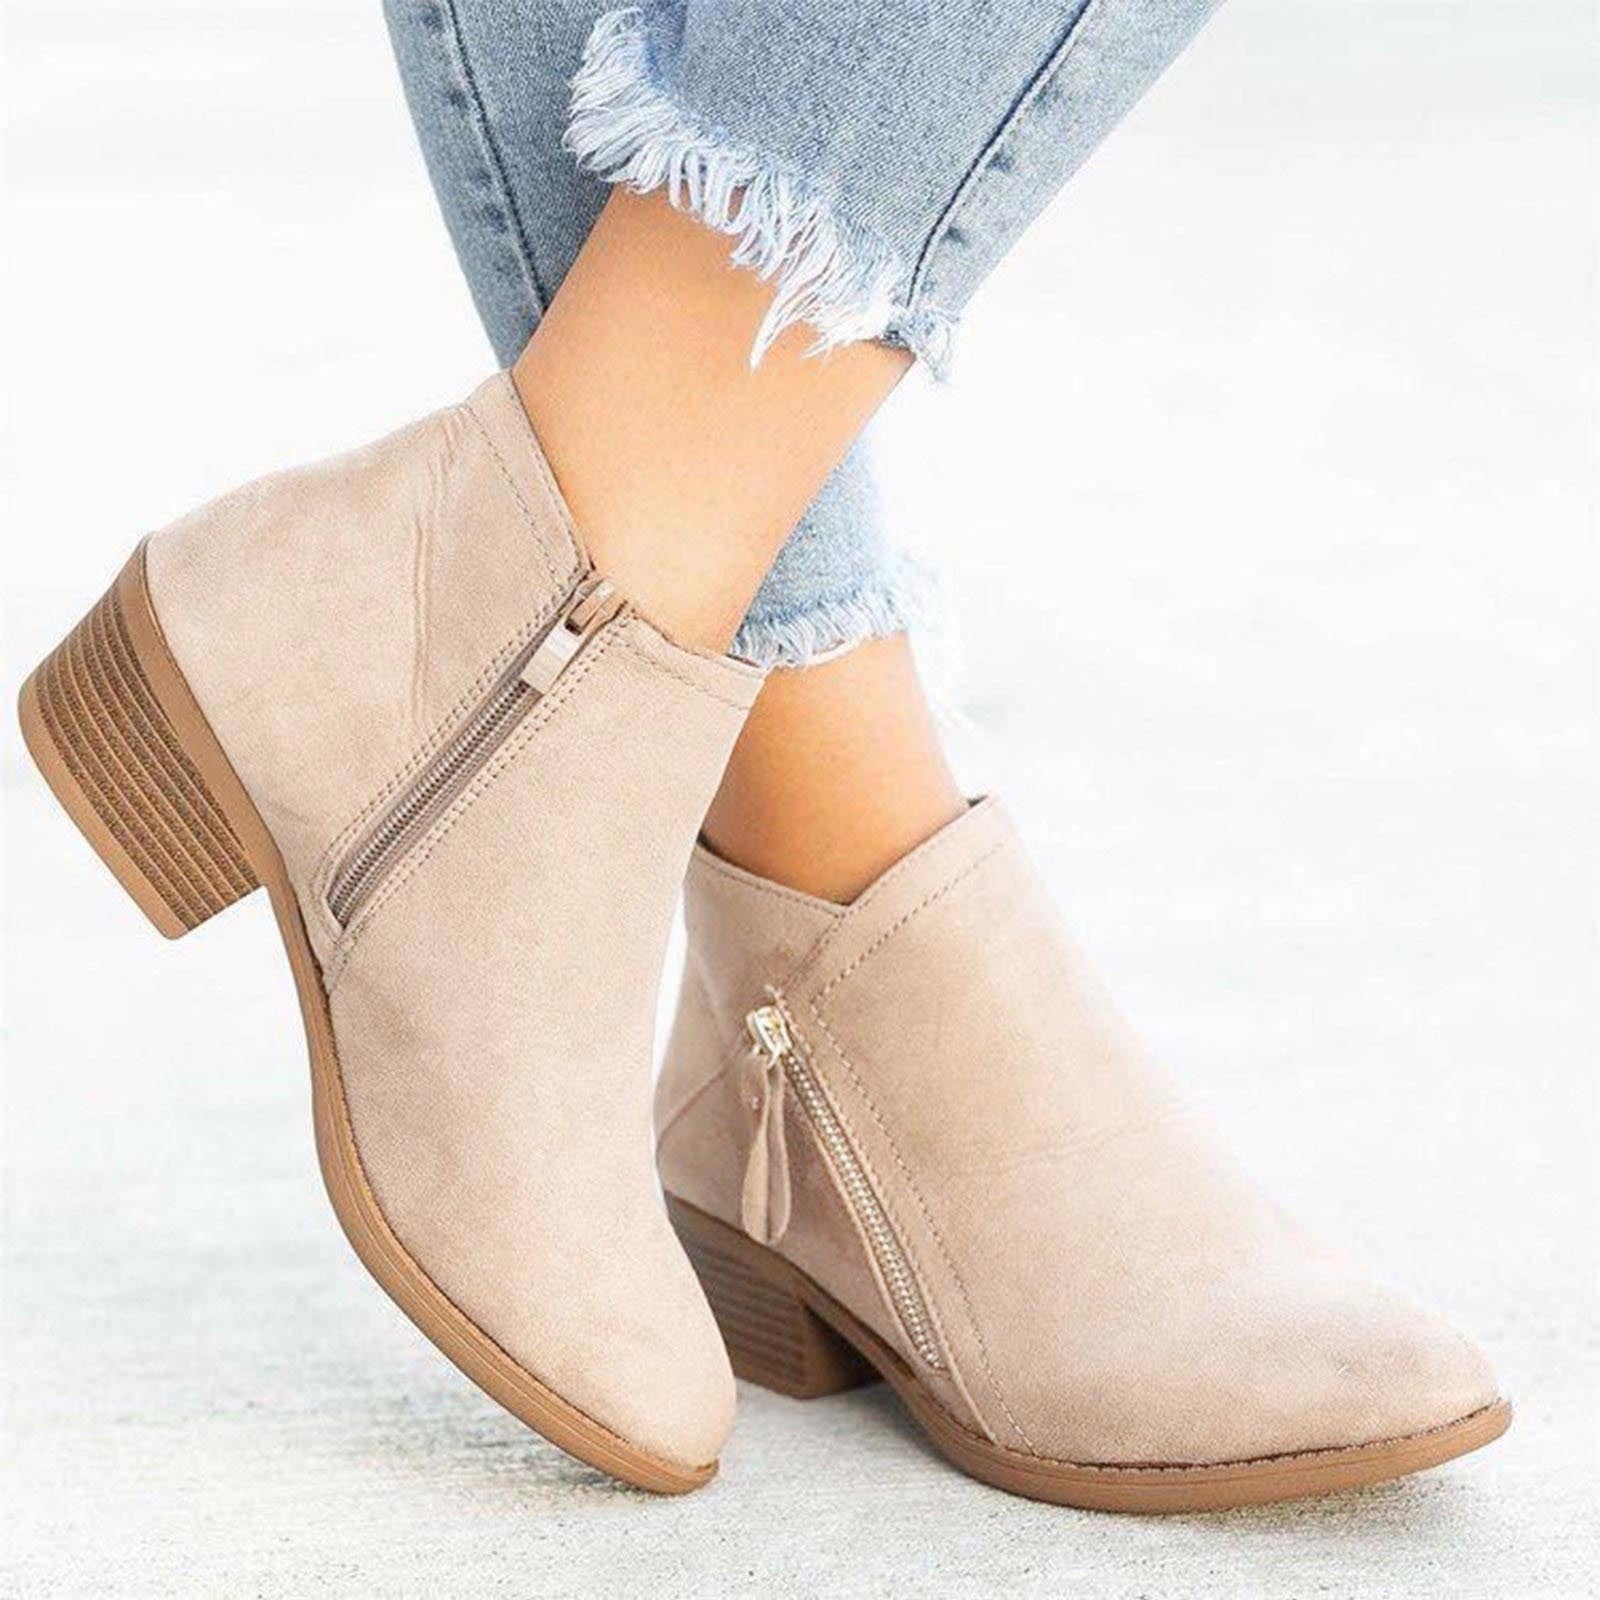 Boots Worth Investing In, From Chelsea to Ankle Boots | theSkimm